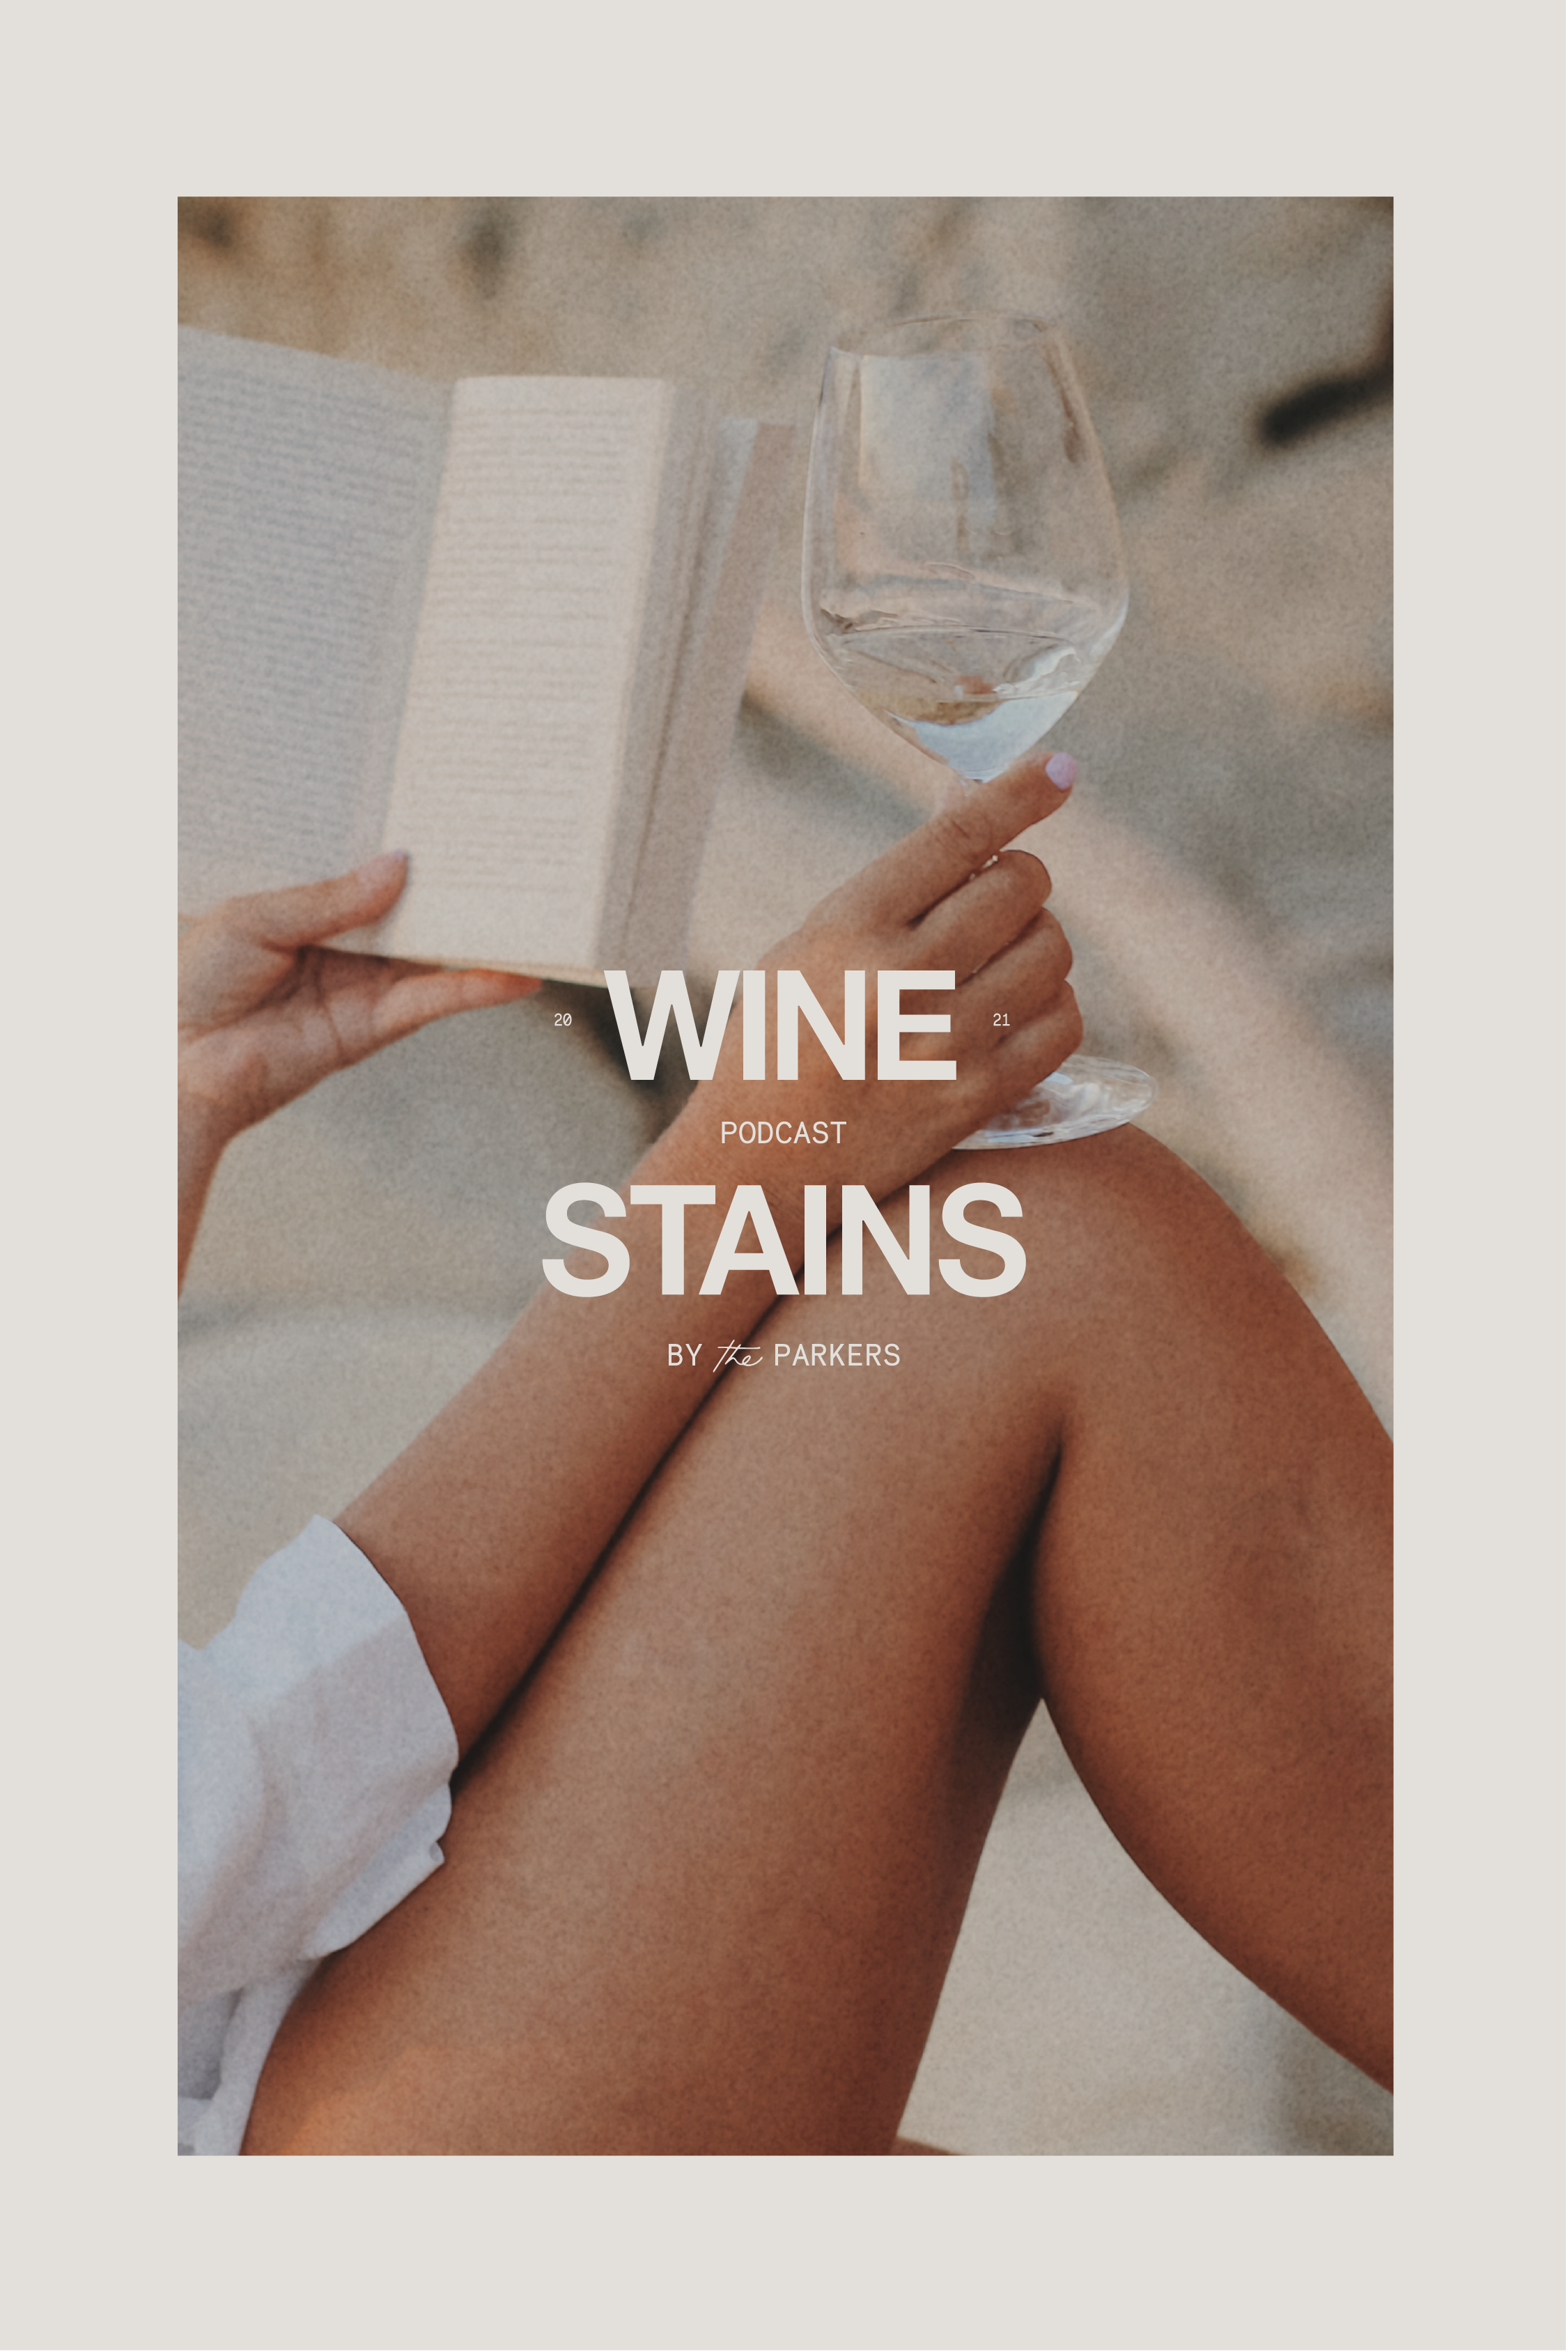 Wine Stains Podcast about lifestyle, business and marketing
